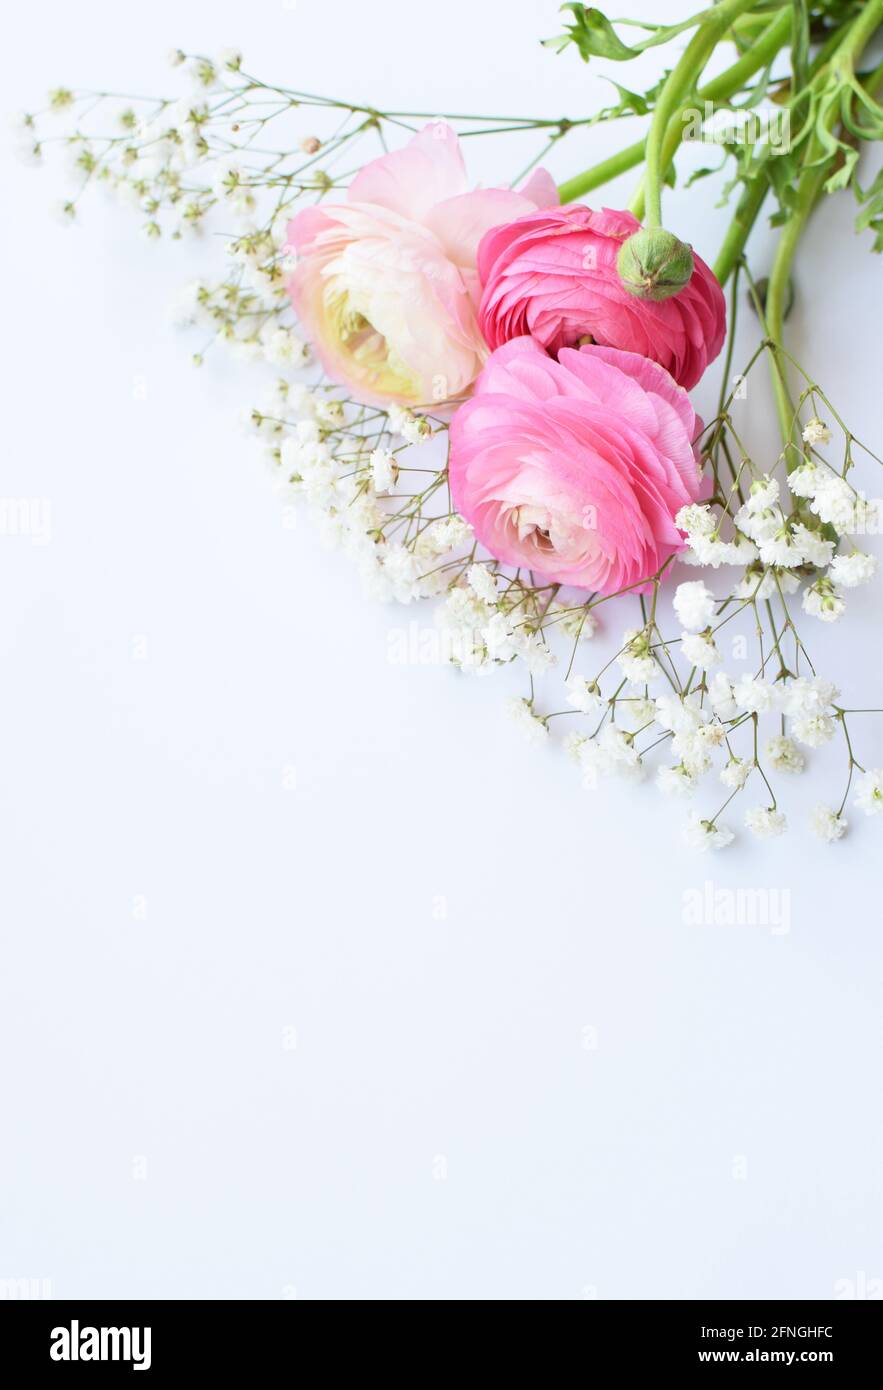 A beautiful bouquet of pink ranunculus (buttercups) with delicate white gypsophila flowers on a white background. Stock Photo